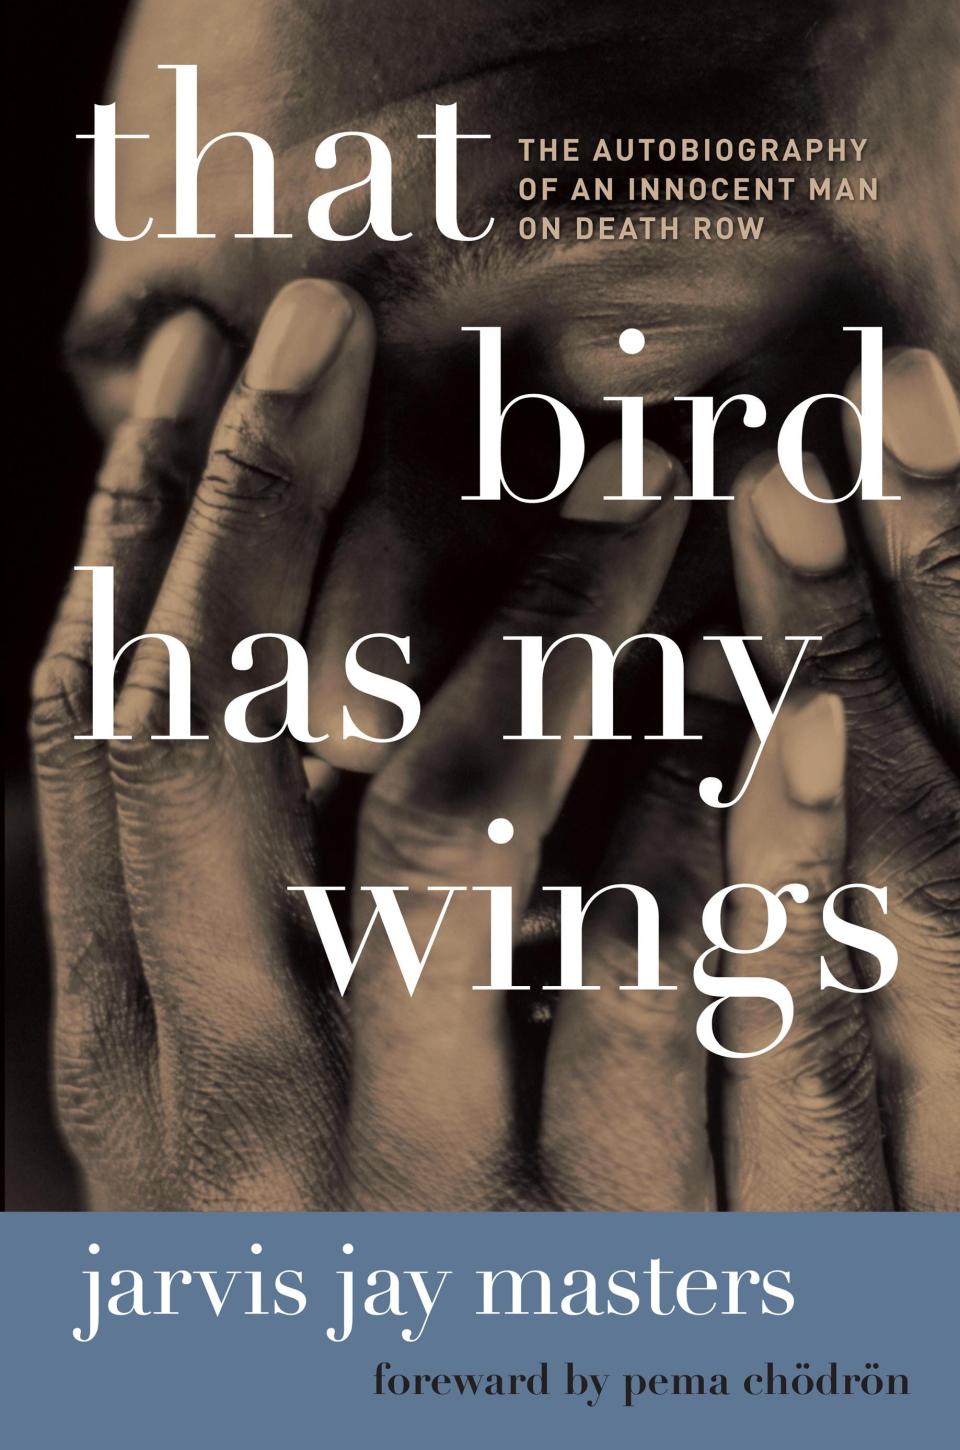 Oprah Winfrey chose Jarvis Jay Masters' autobiography, "That Bird Has My Wings," for her book club in September 2022.